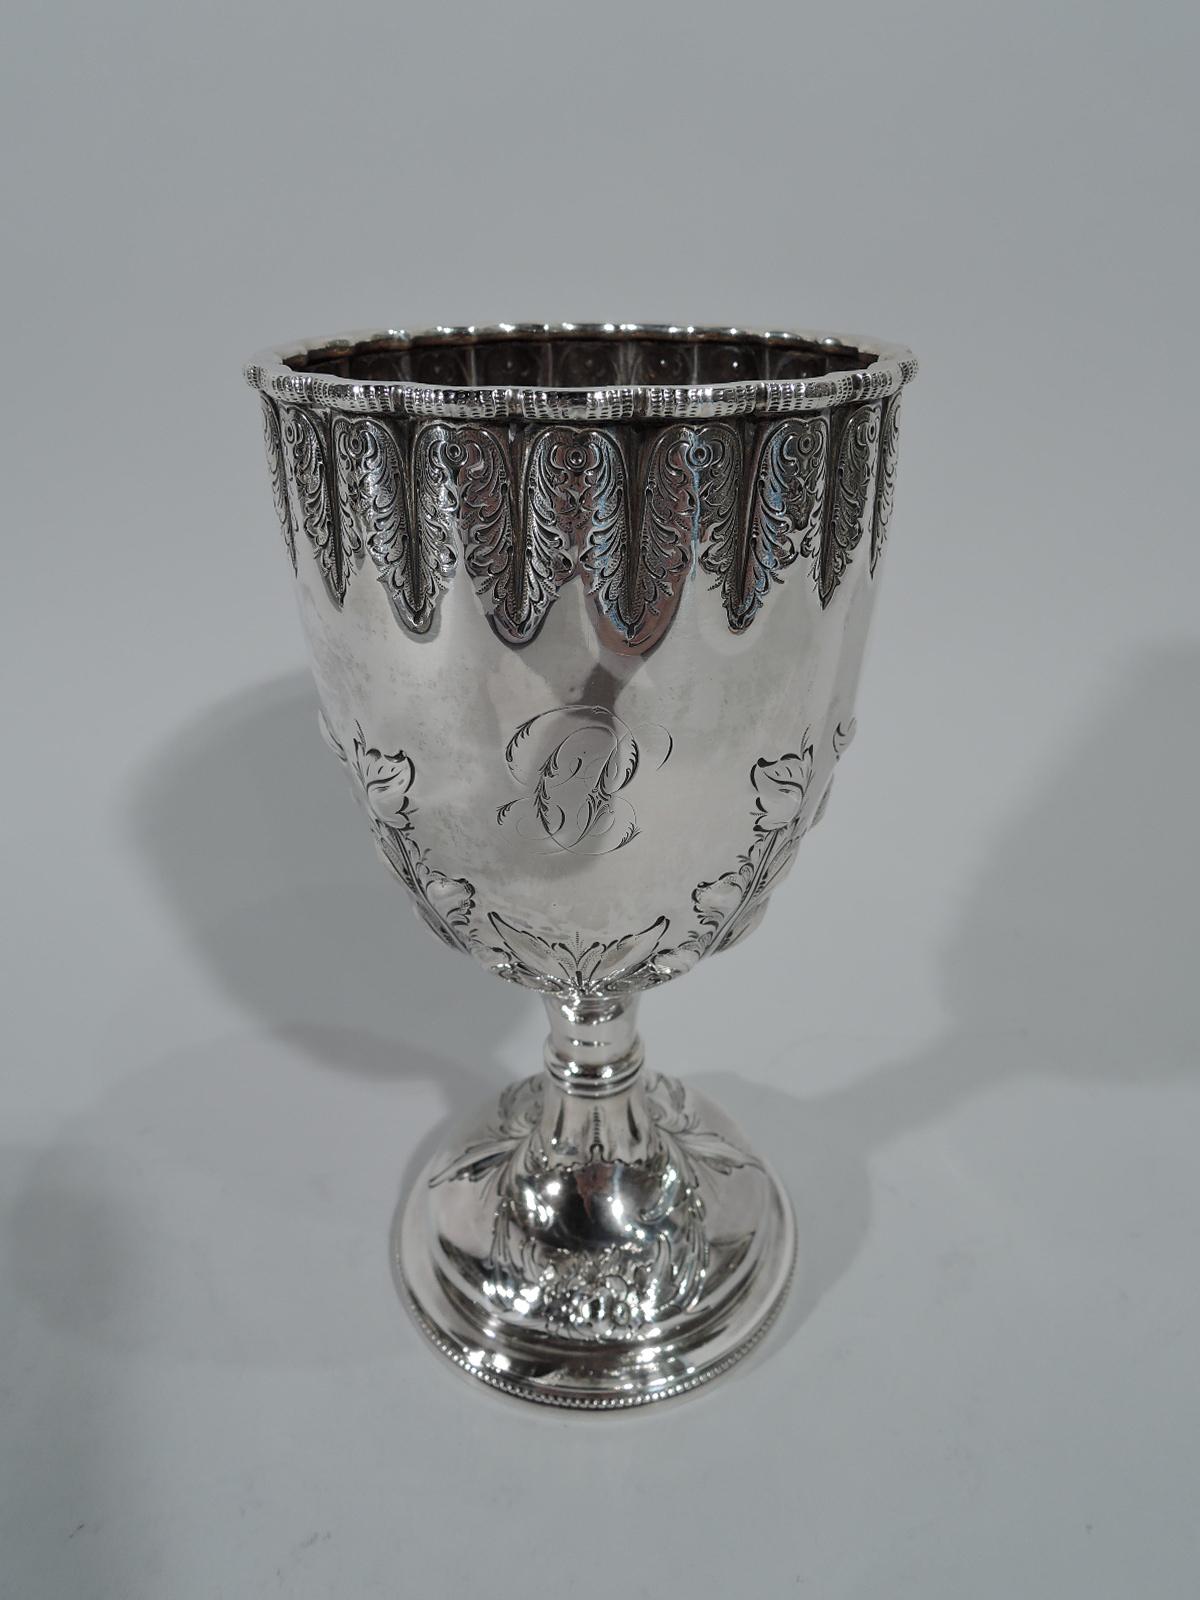 Early sterling silver goblet. Retailed by Tiffany & Co. at 550 Broadway, New York. Ovoid bowl with half-lobbing and scalloped rim on knopped stem terminating in domed foot. Engraved and repousse flowers and foliage. Script monogram. A fancy piece by